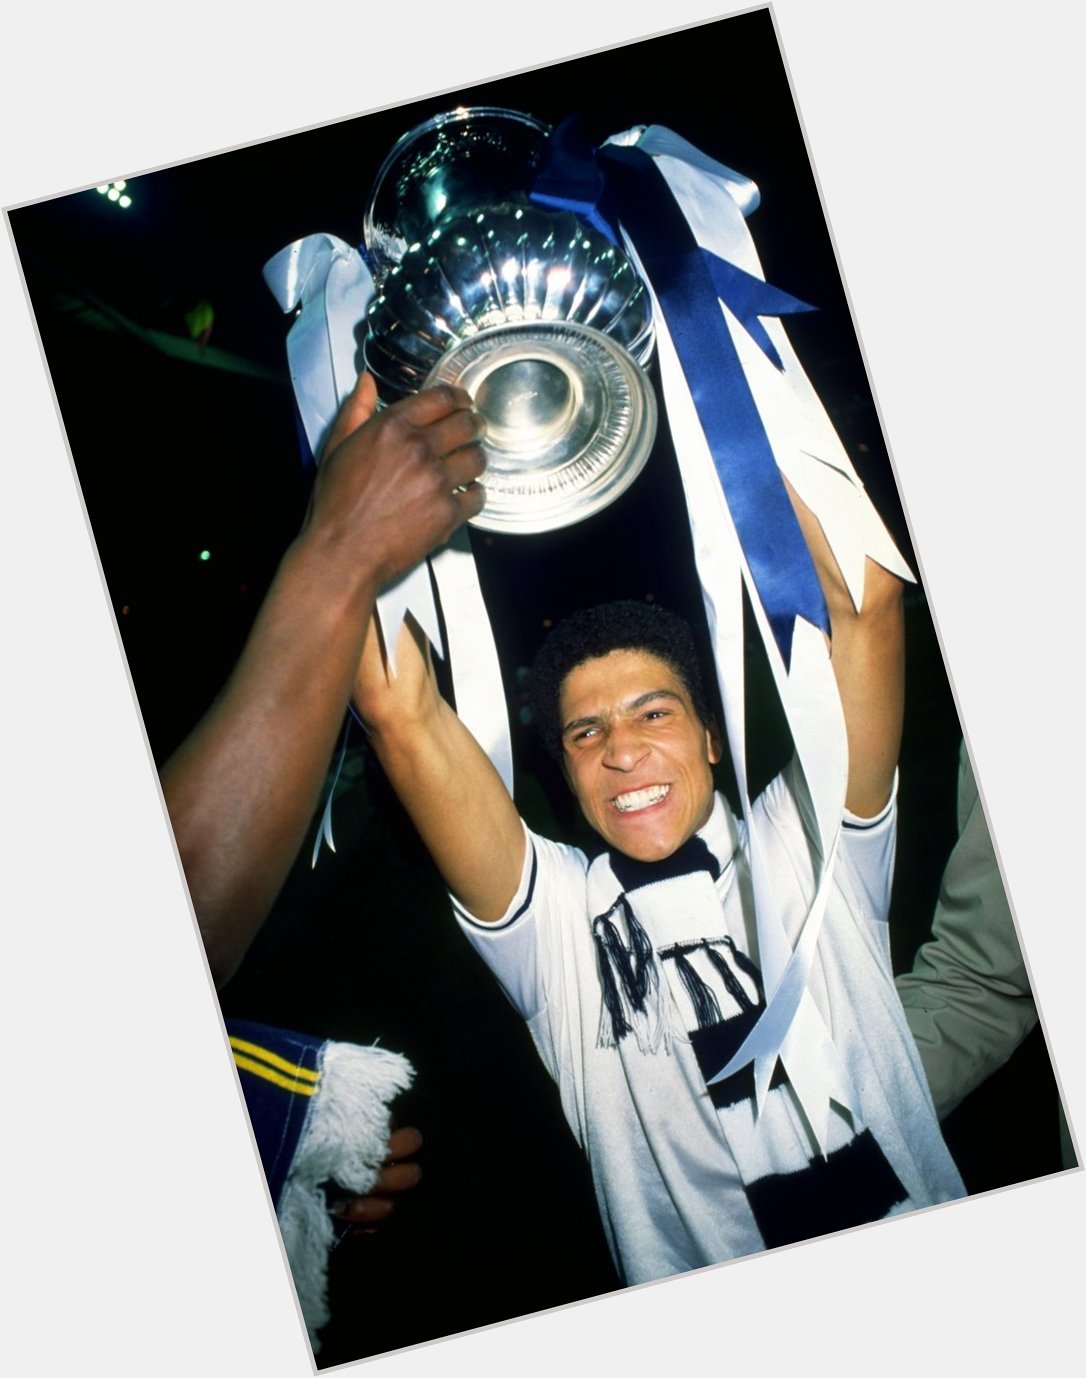 Happy Birthday, Chris Hughton!   FA Cup UEFA Cup  53 caps; two major tournaments

And not a bad manager. 